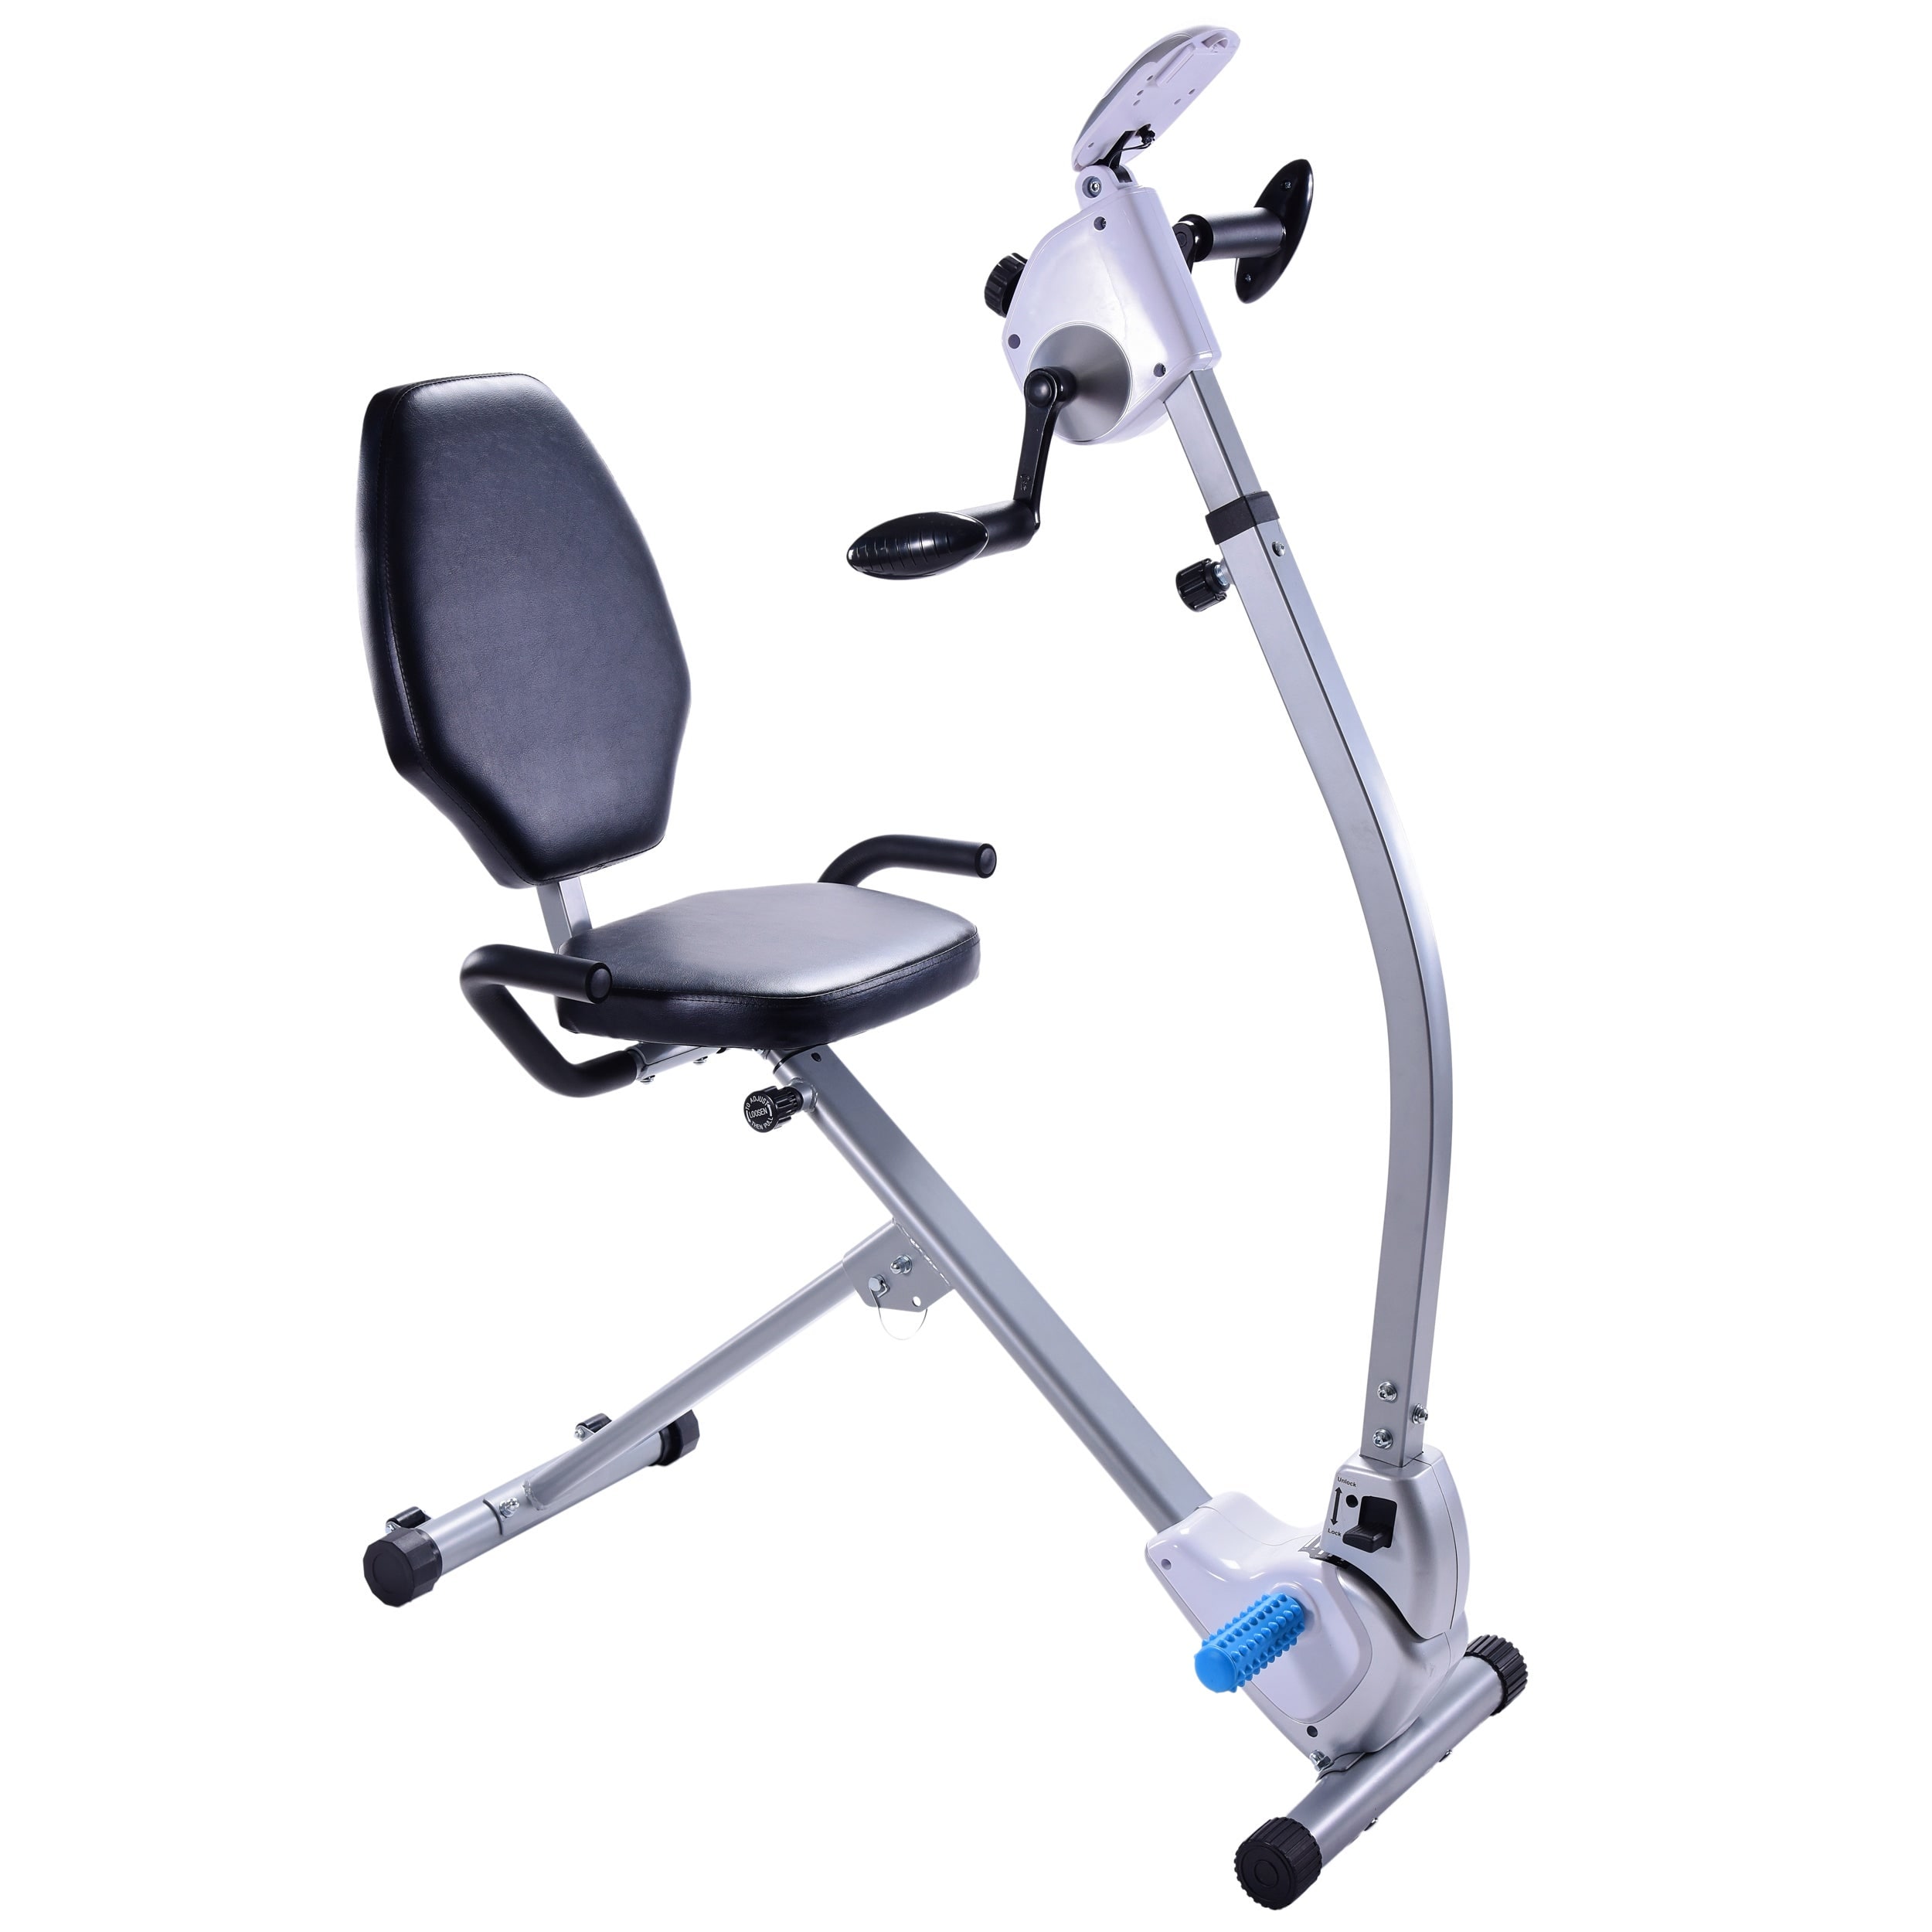 Stamina Seated Upper Body Exercise Bike - Silver